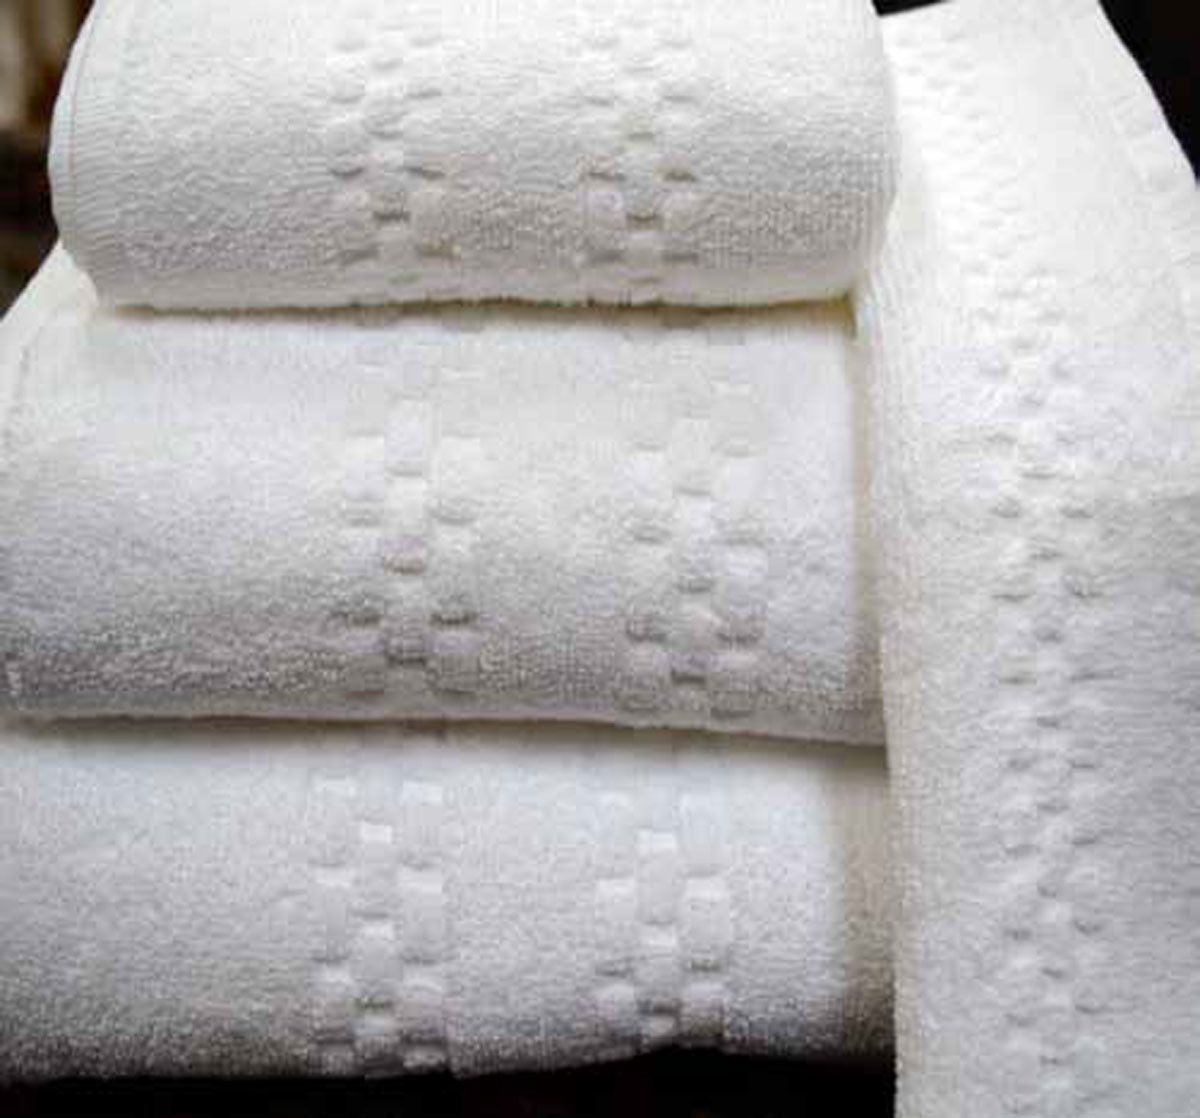 What are the reviews like for Oxford Viceroy Room Towels, considering the towels definition?